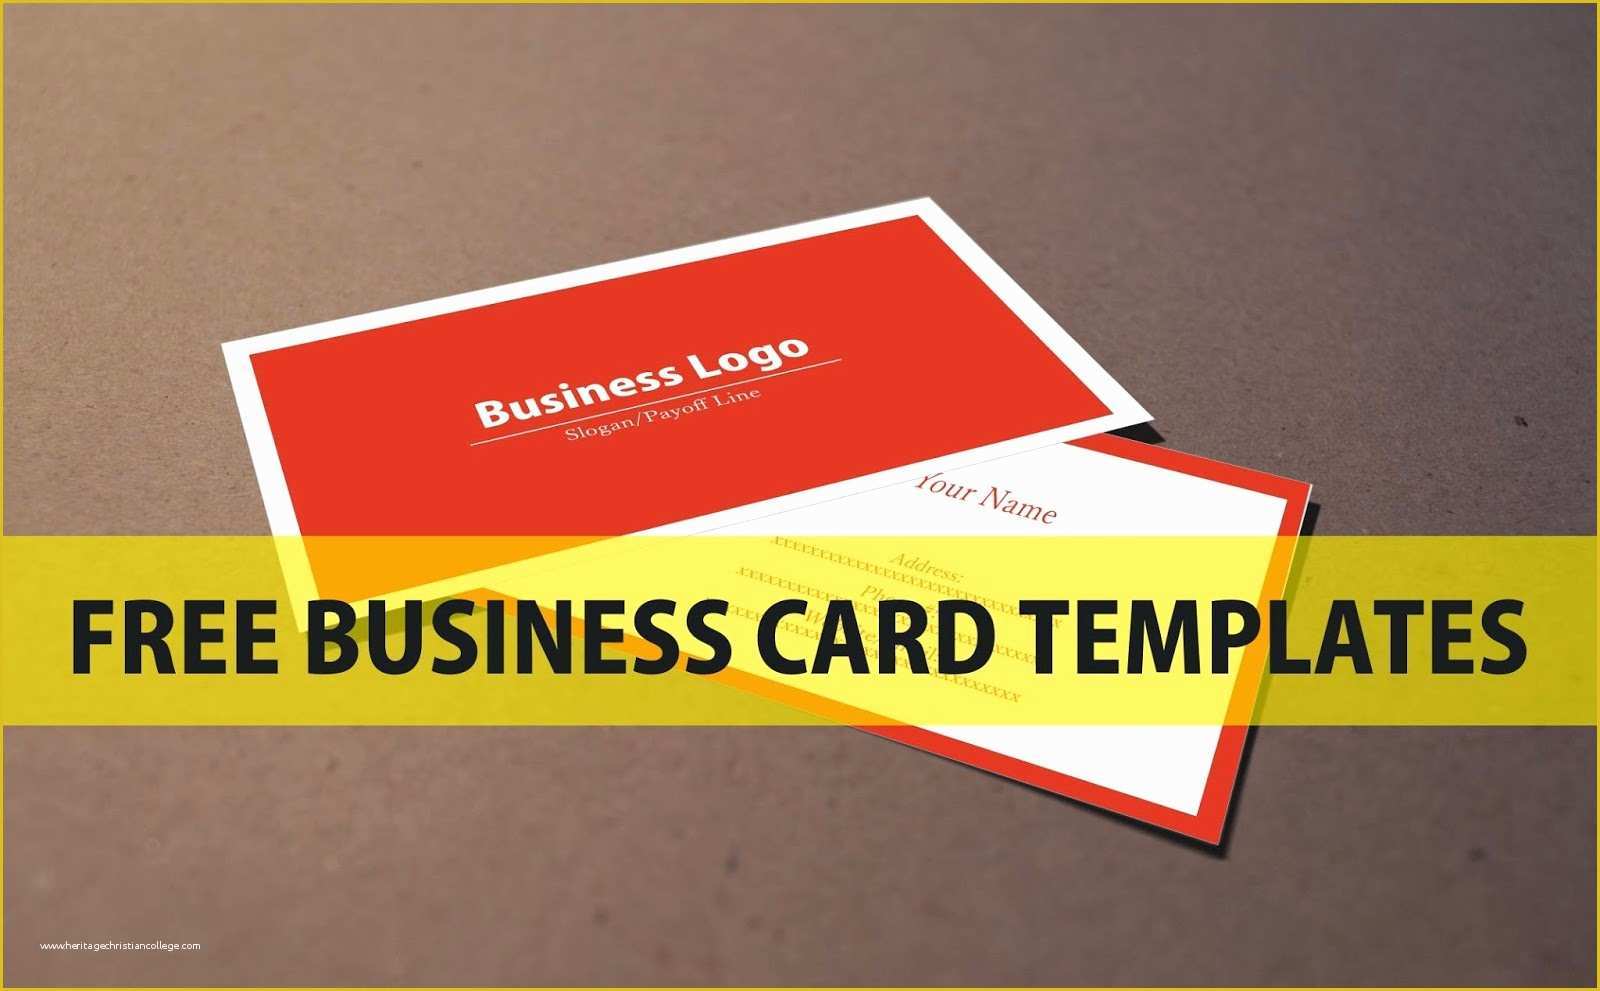 Business Card Template Free Download Of Free Business Card Template Download Coreldraw File A